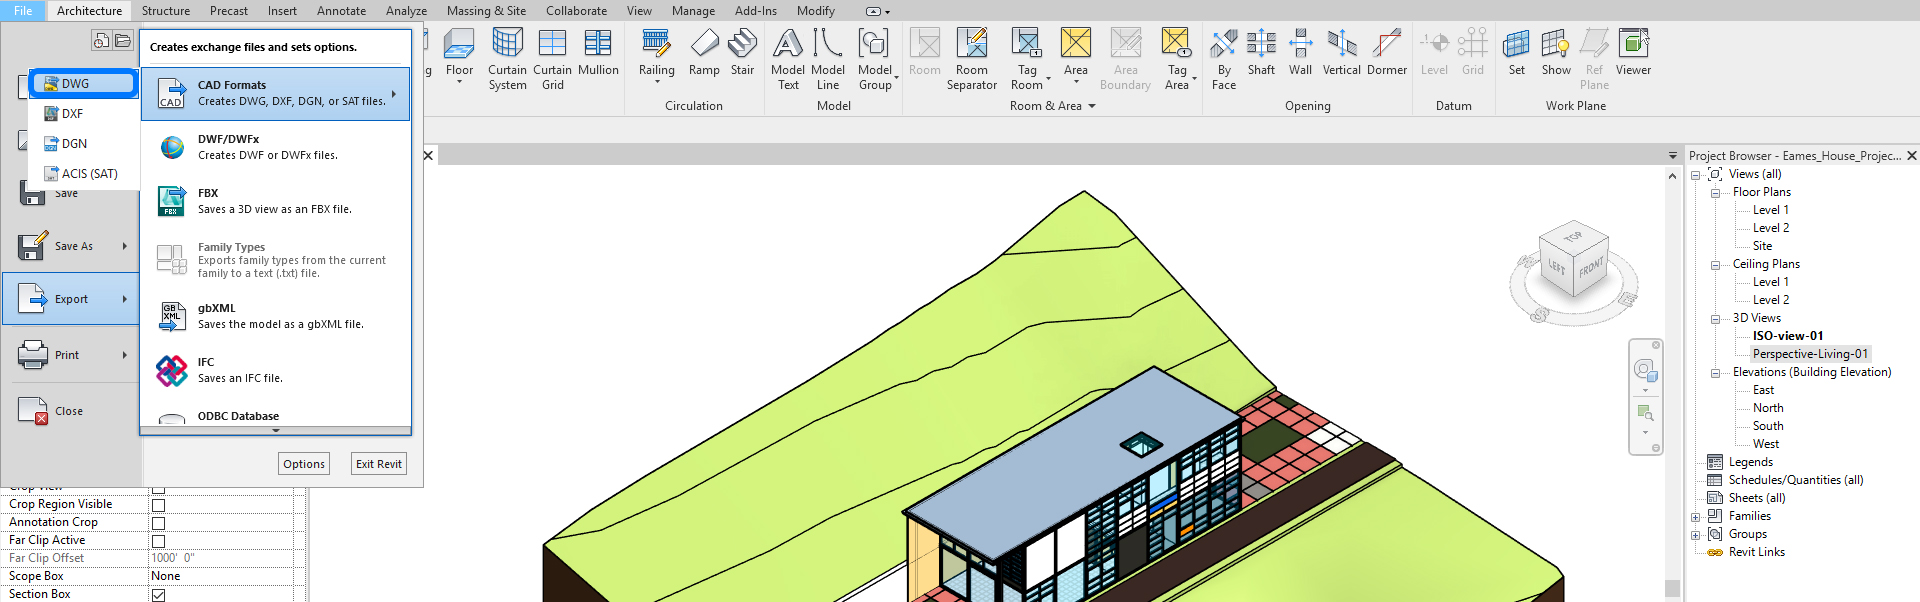 It indicates how to export the isometric view for SketchUp model.